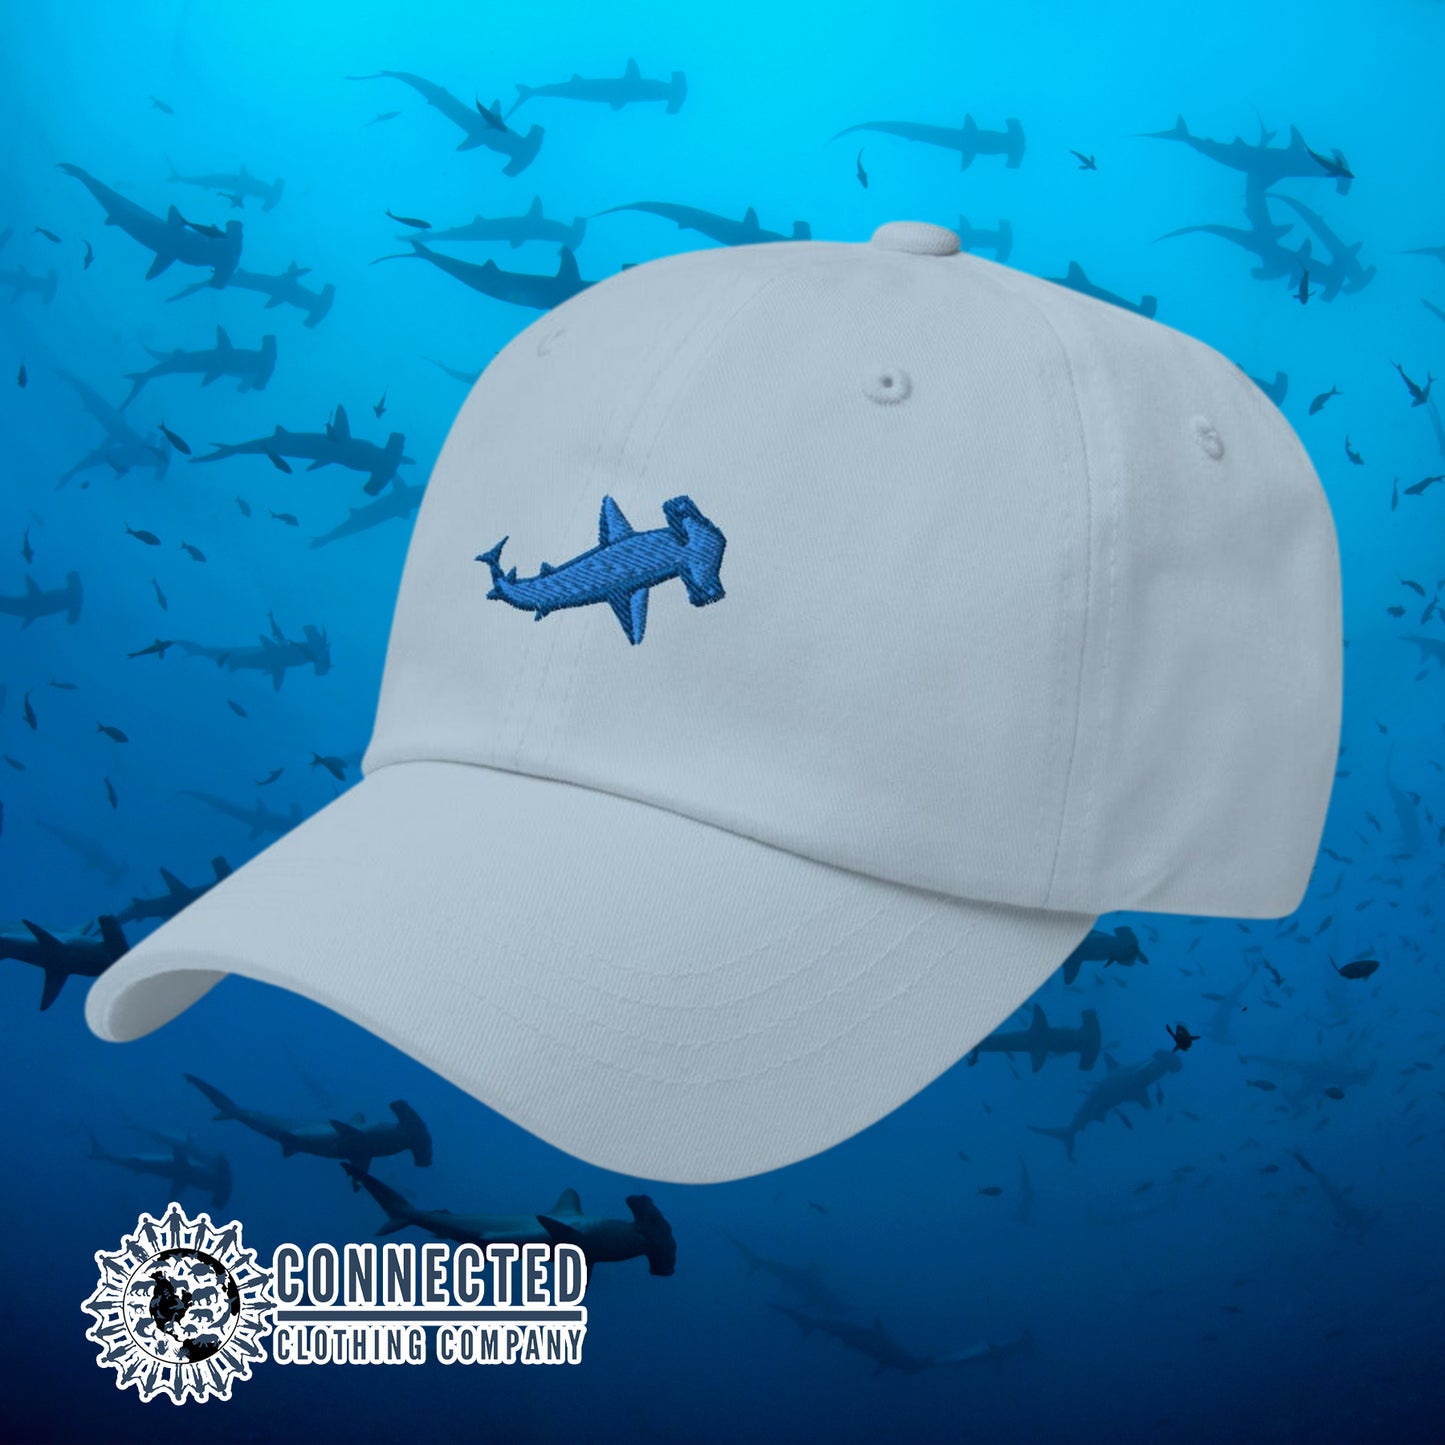 Blue Hammerhead Shark Cotton Cap - Connected Clothing Company - Ethical & Sustainable Clothing That Gives Back - 10% donated to Oceana shark conservation